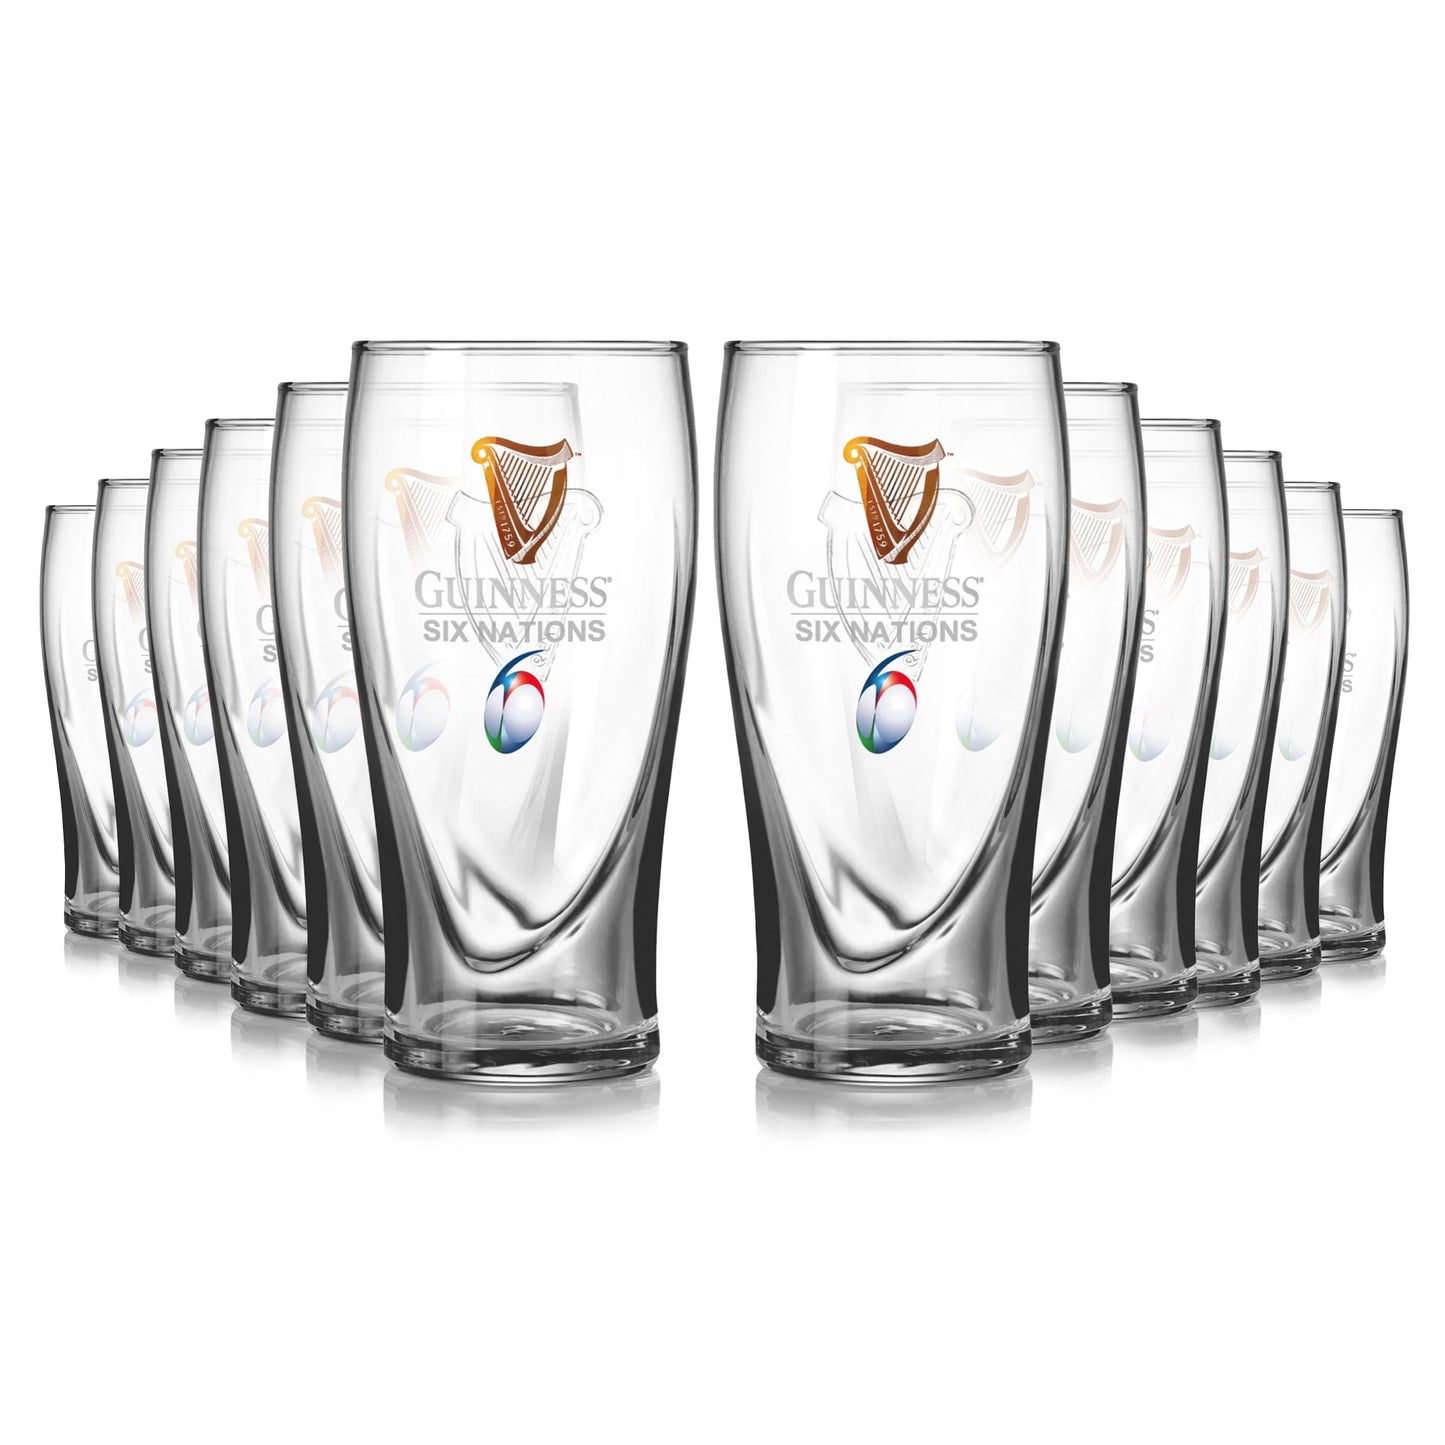 Guinness Six Nations Pint Glass - 12 Pack